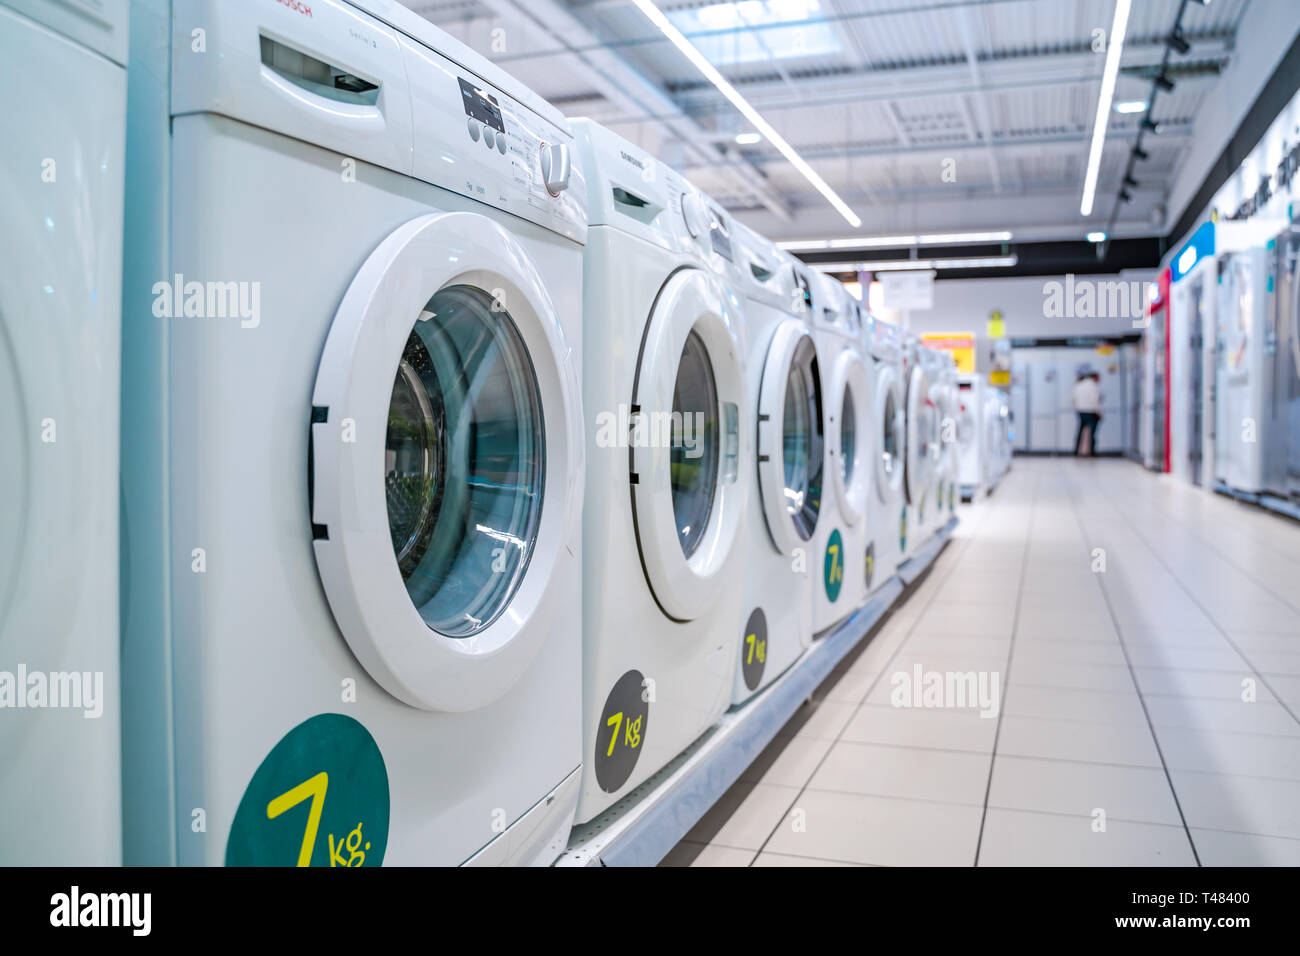 Valencia,Spain - April 03, 2019: Washing Machines, drying machines,household  appliances department. Carrefour supermarket Stock Photo - Alamy